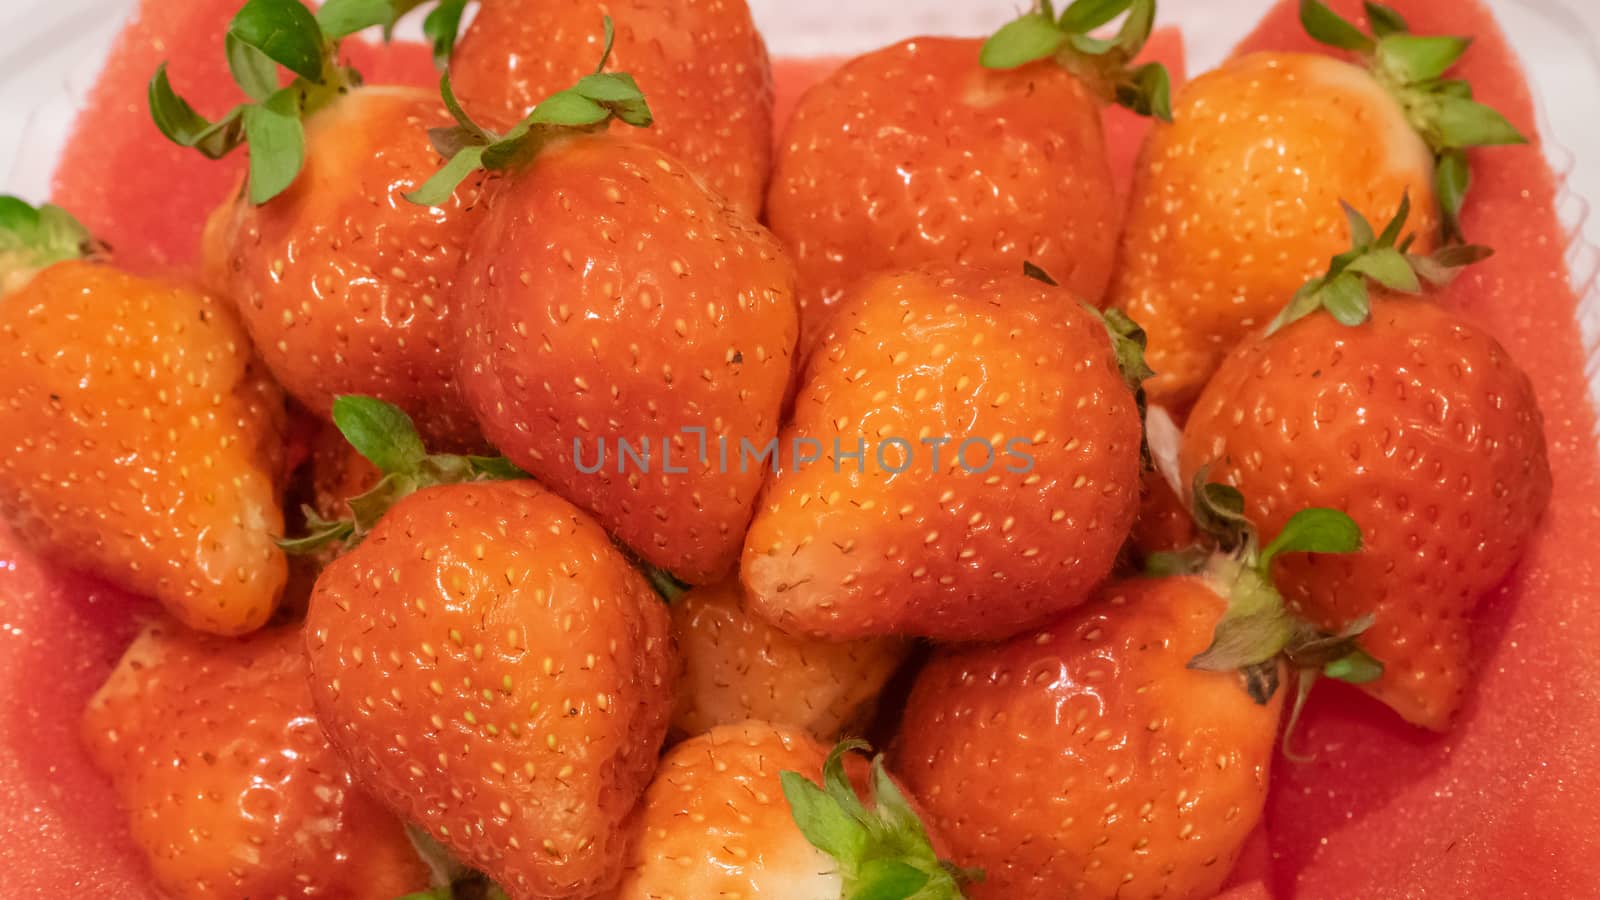 The close up of delicious strawberry fruit on red foam pad background.